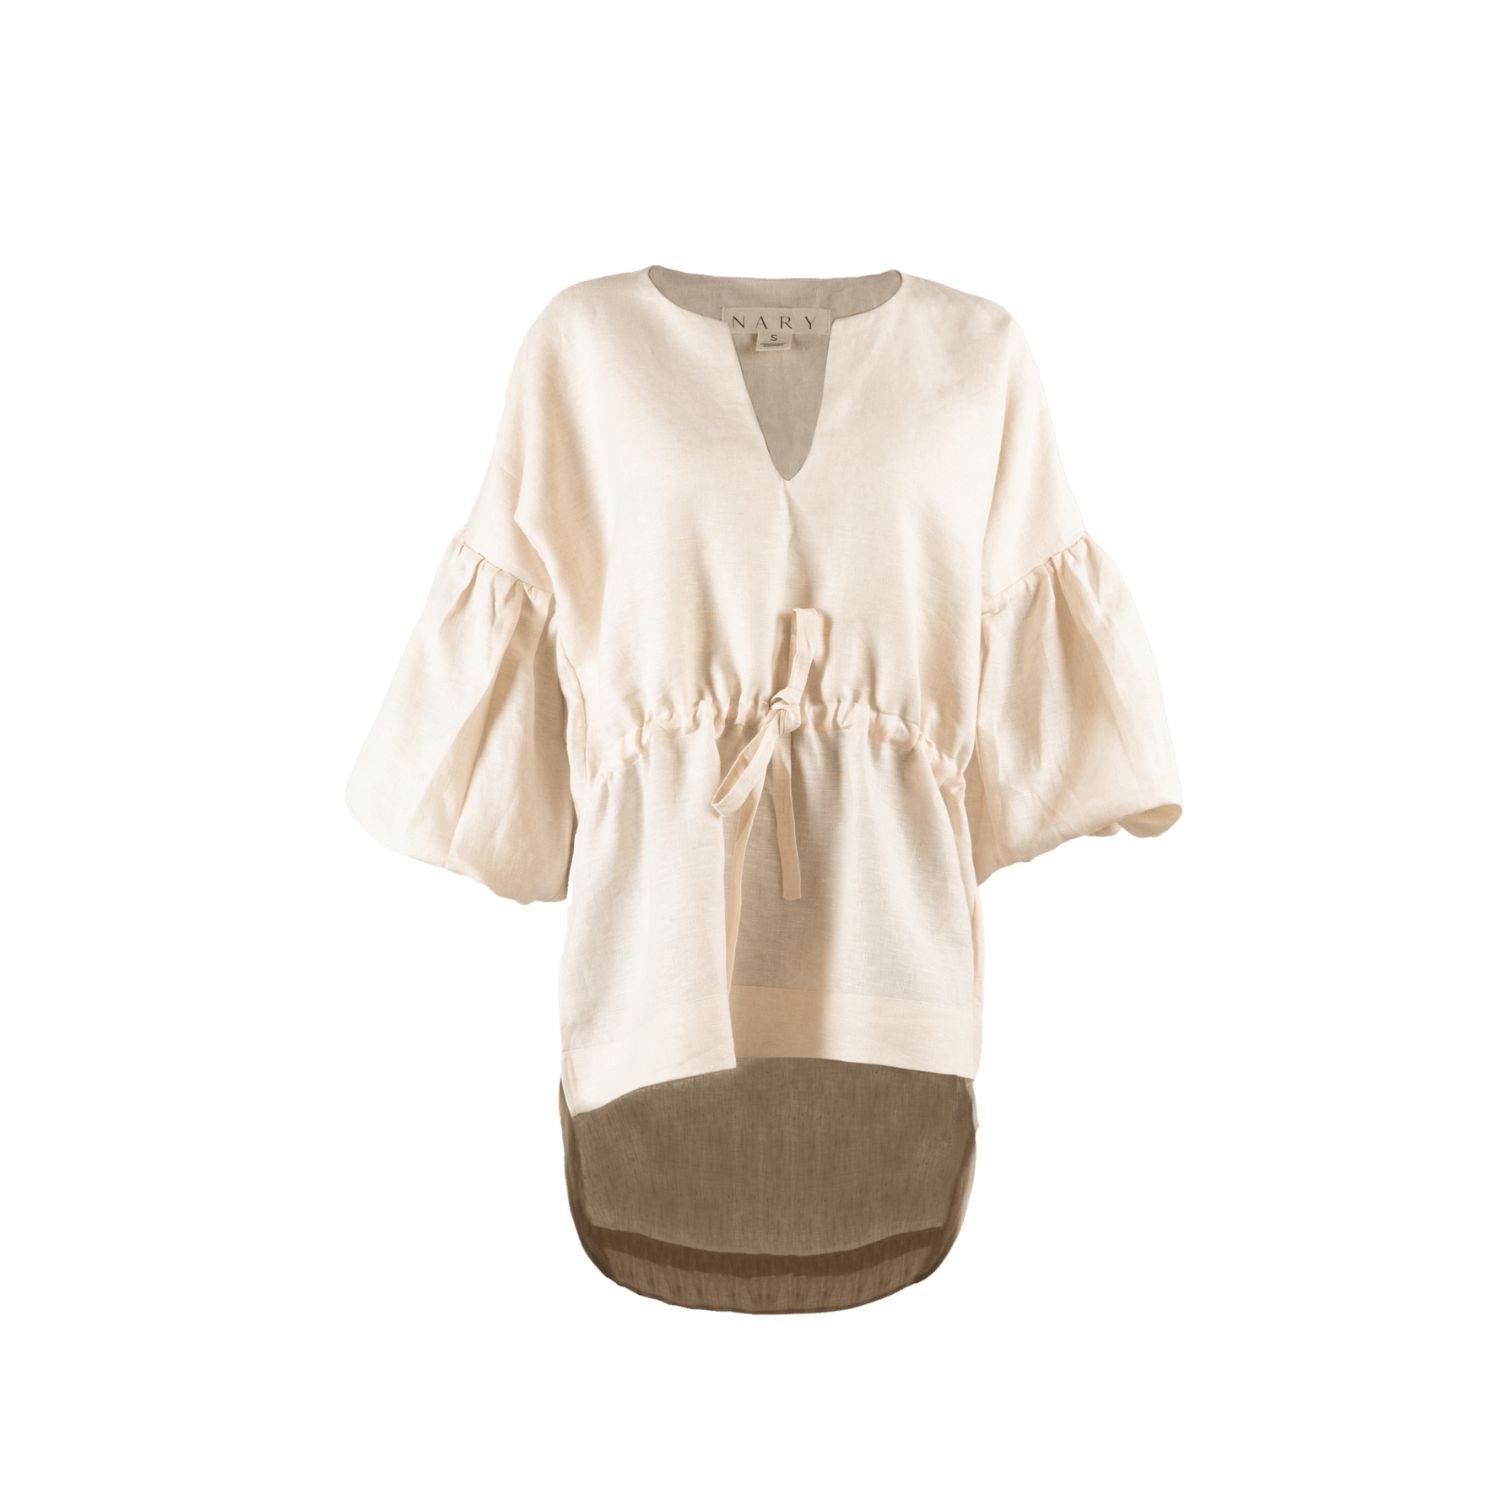 Koh Rong Linen Lounge Top in Tan